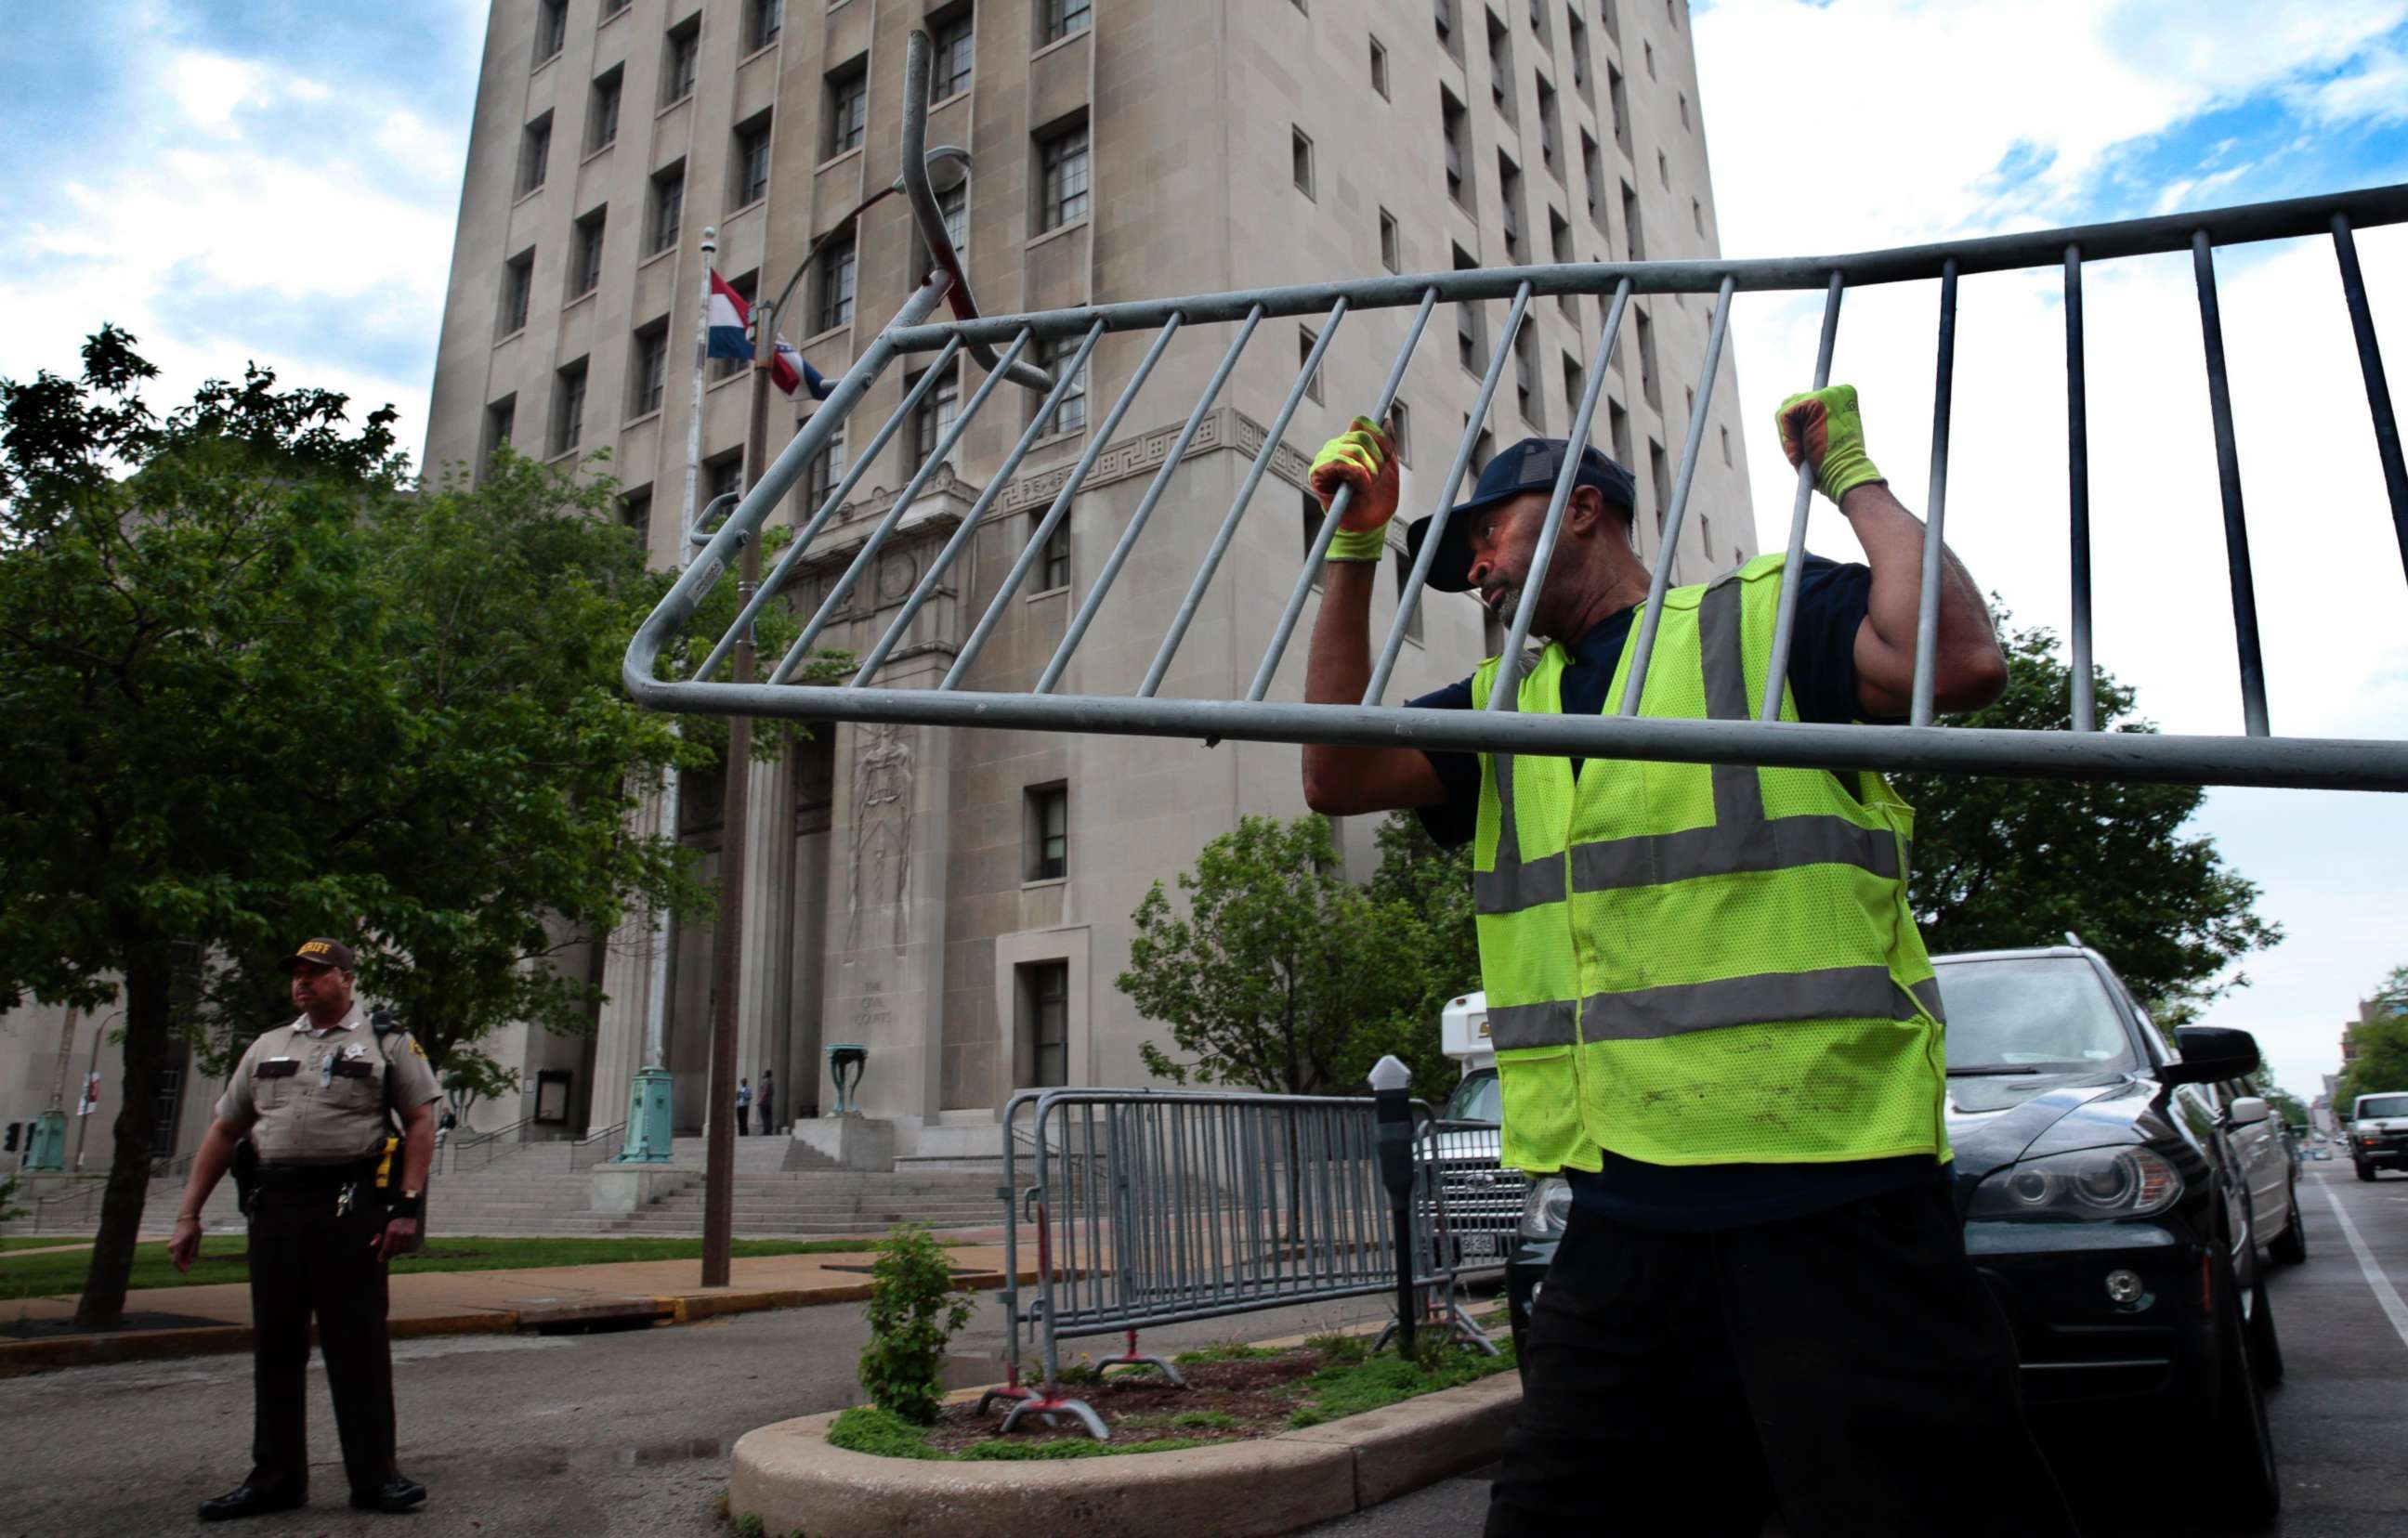 PHOTO: Members of the St. Louis streets department unload barricades on the side of the Civil Courts building in St. Louis, Mo., on May 9, 2018, in advance of the start of jury selection in the trial of Missouri Gov. Eric Greitens.